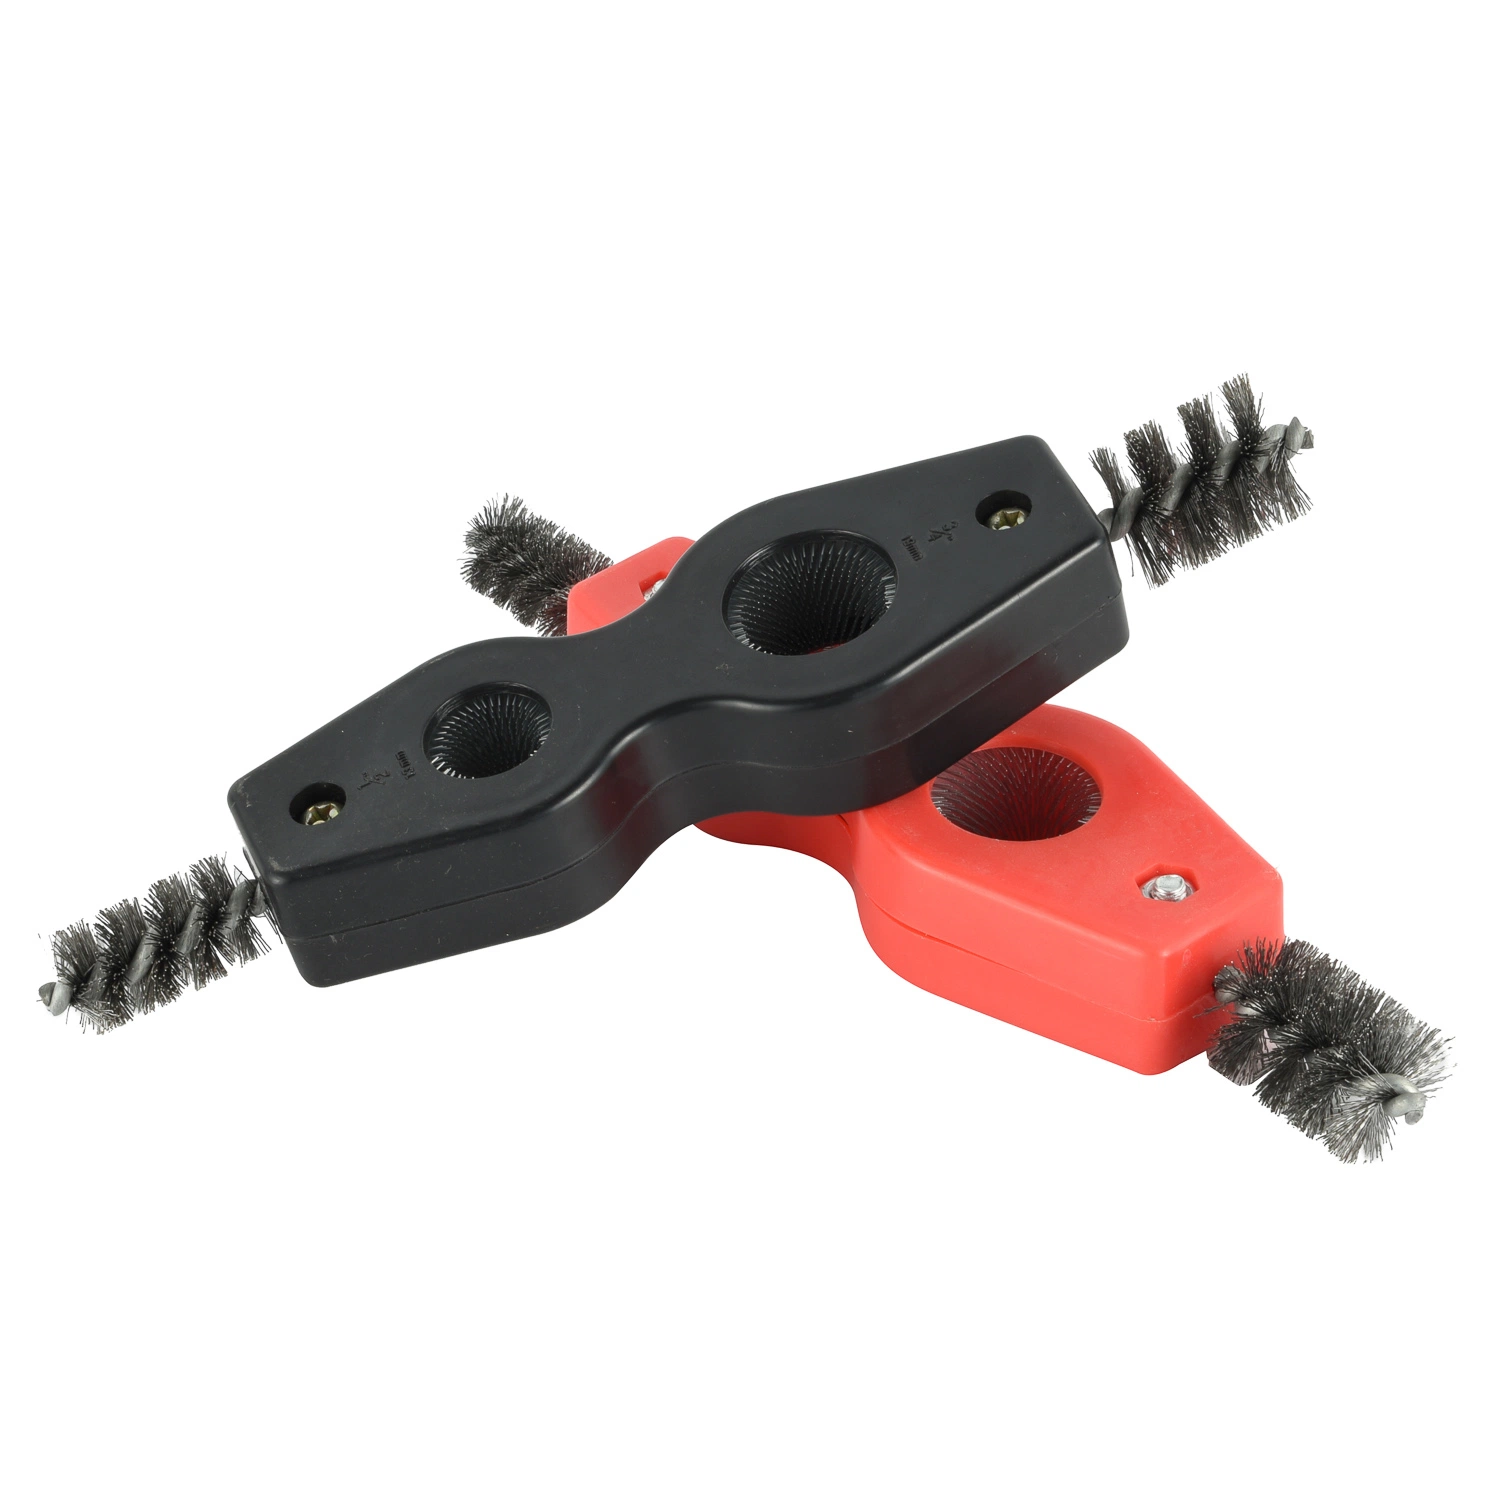 4-in-1 Brush Hand Tool Other Tools